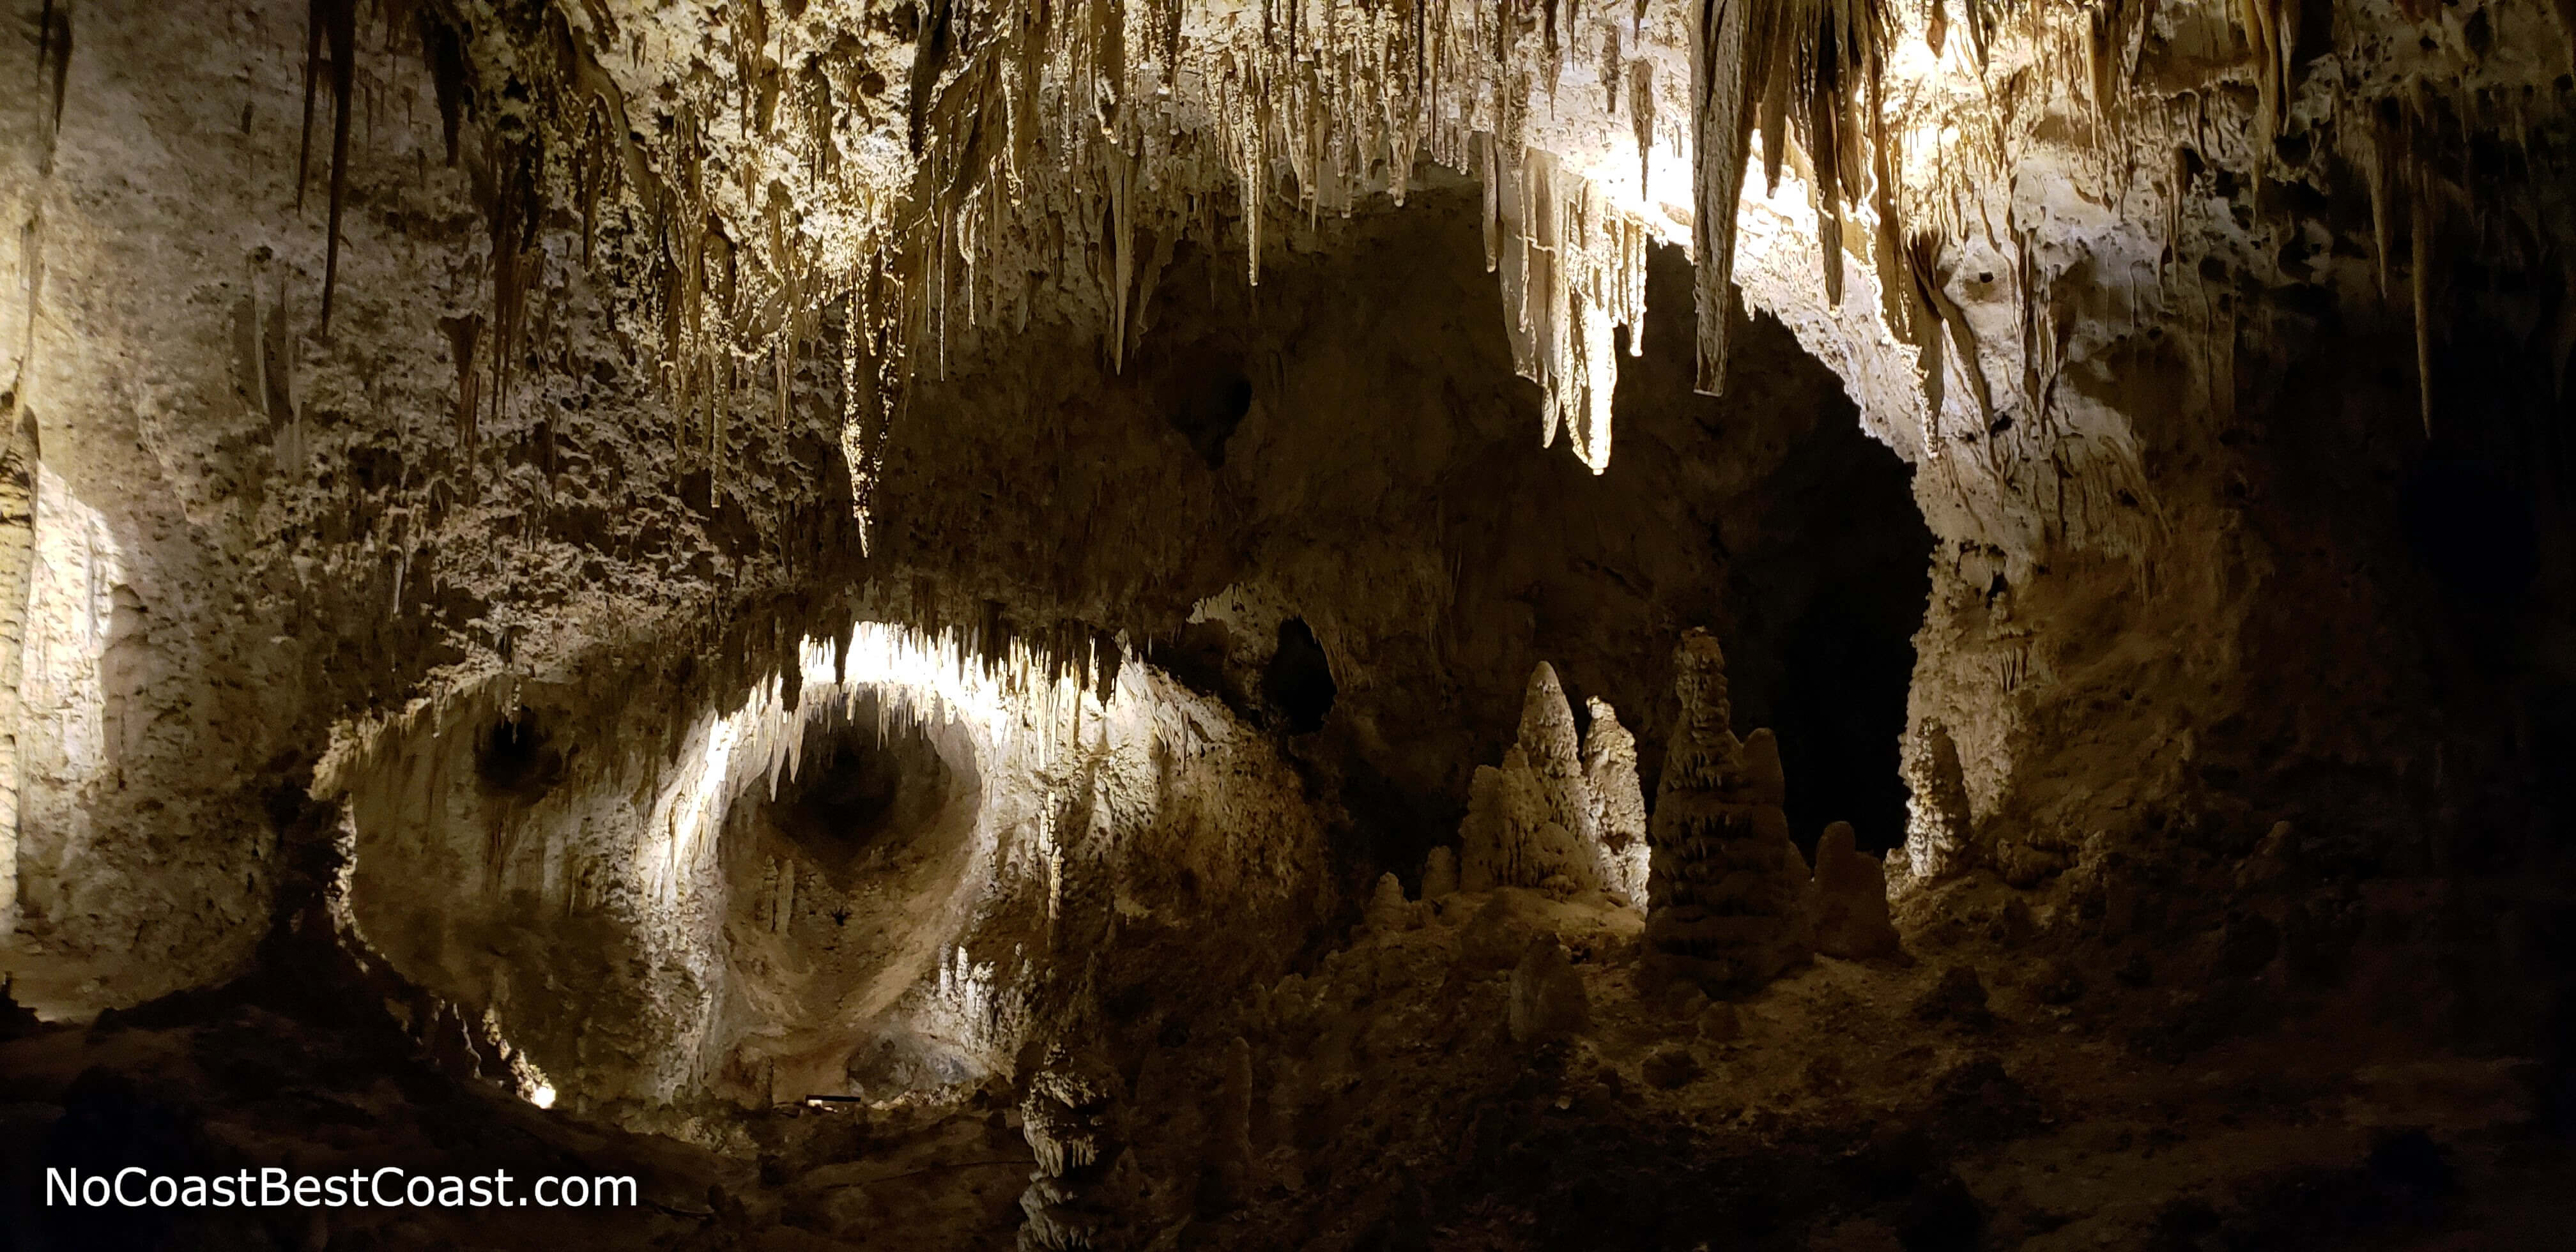 Stalactites and stalagmites line the trail throughout the Big Room